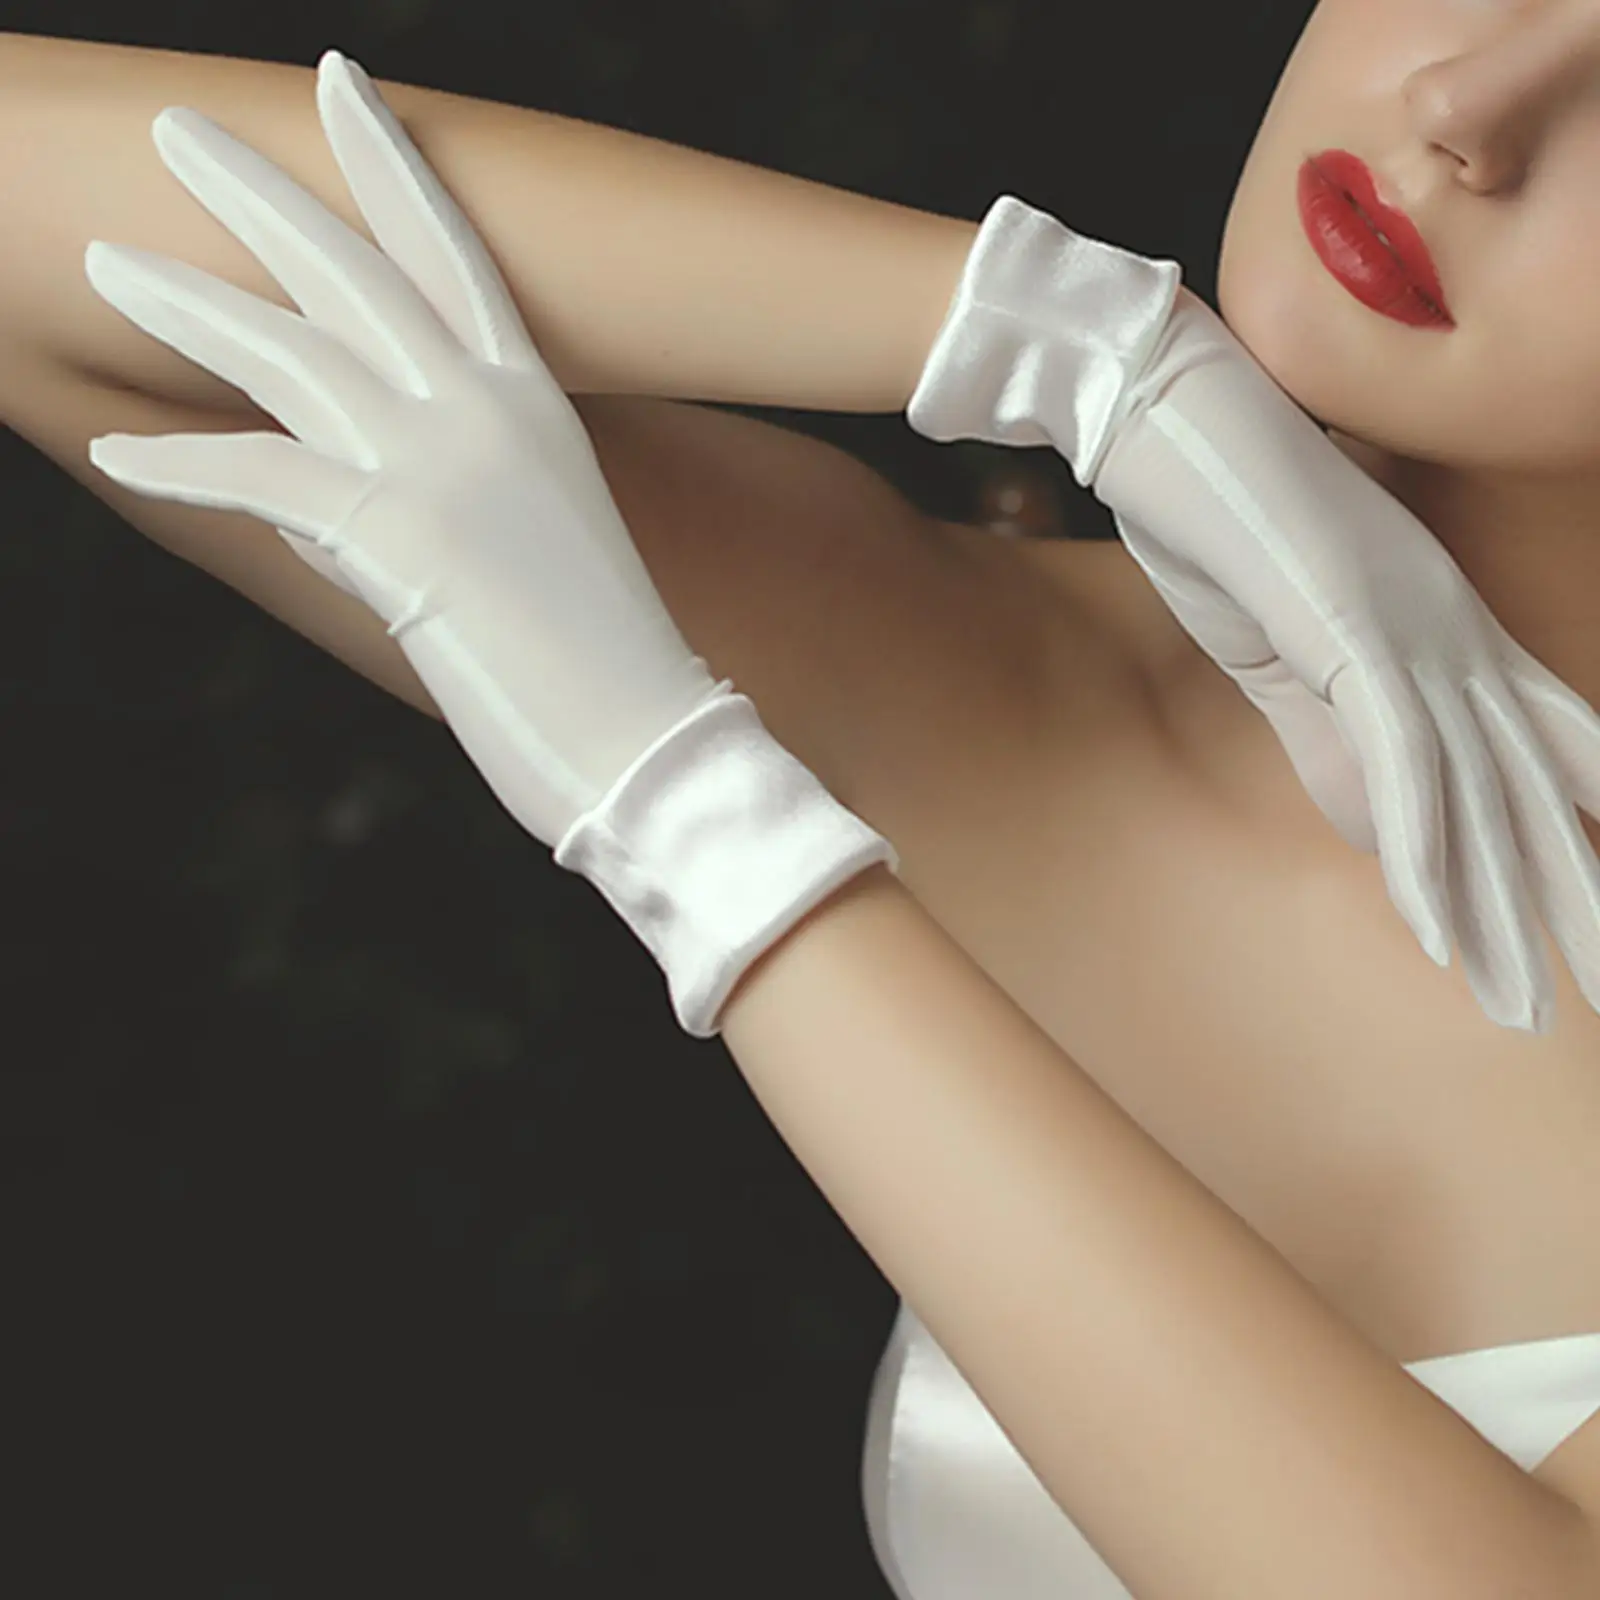 Bridal Gloves Bridesmaid White Short Satin Gloves for Dance Opera Marriage Accessories